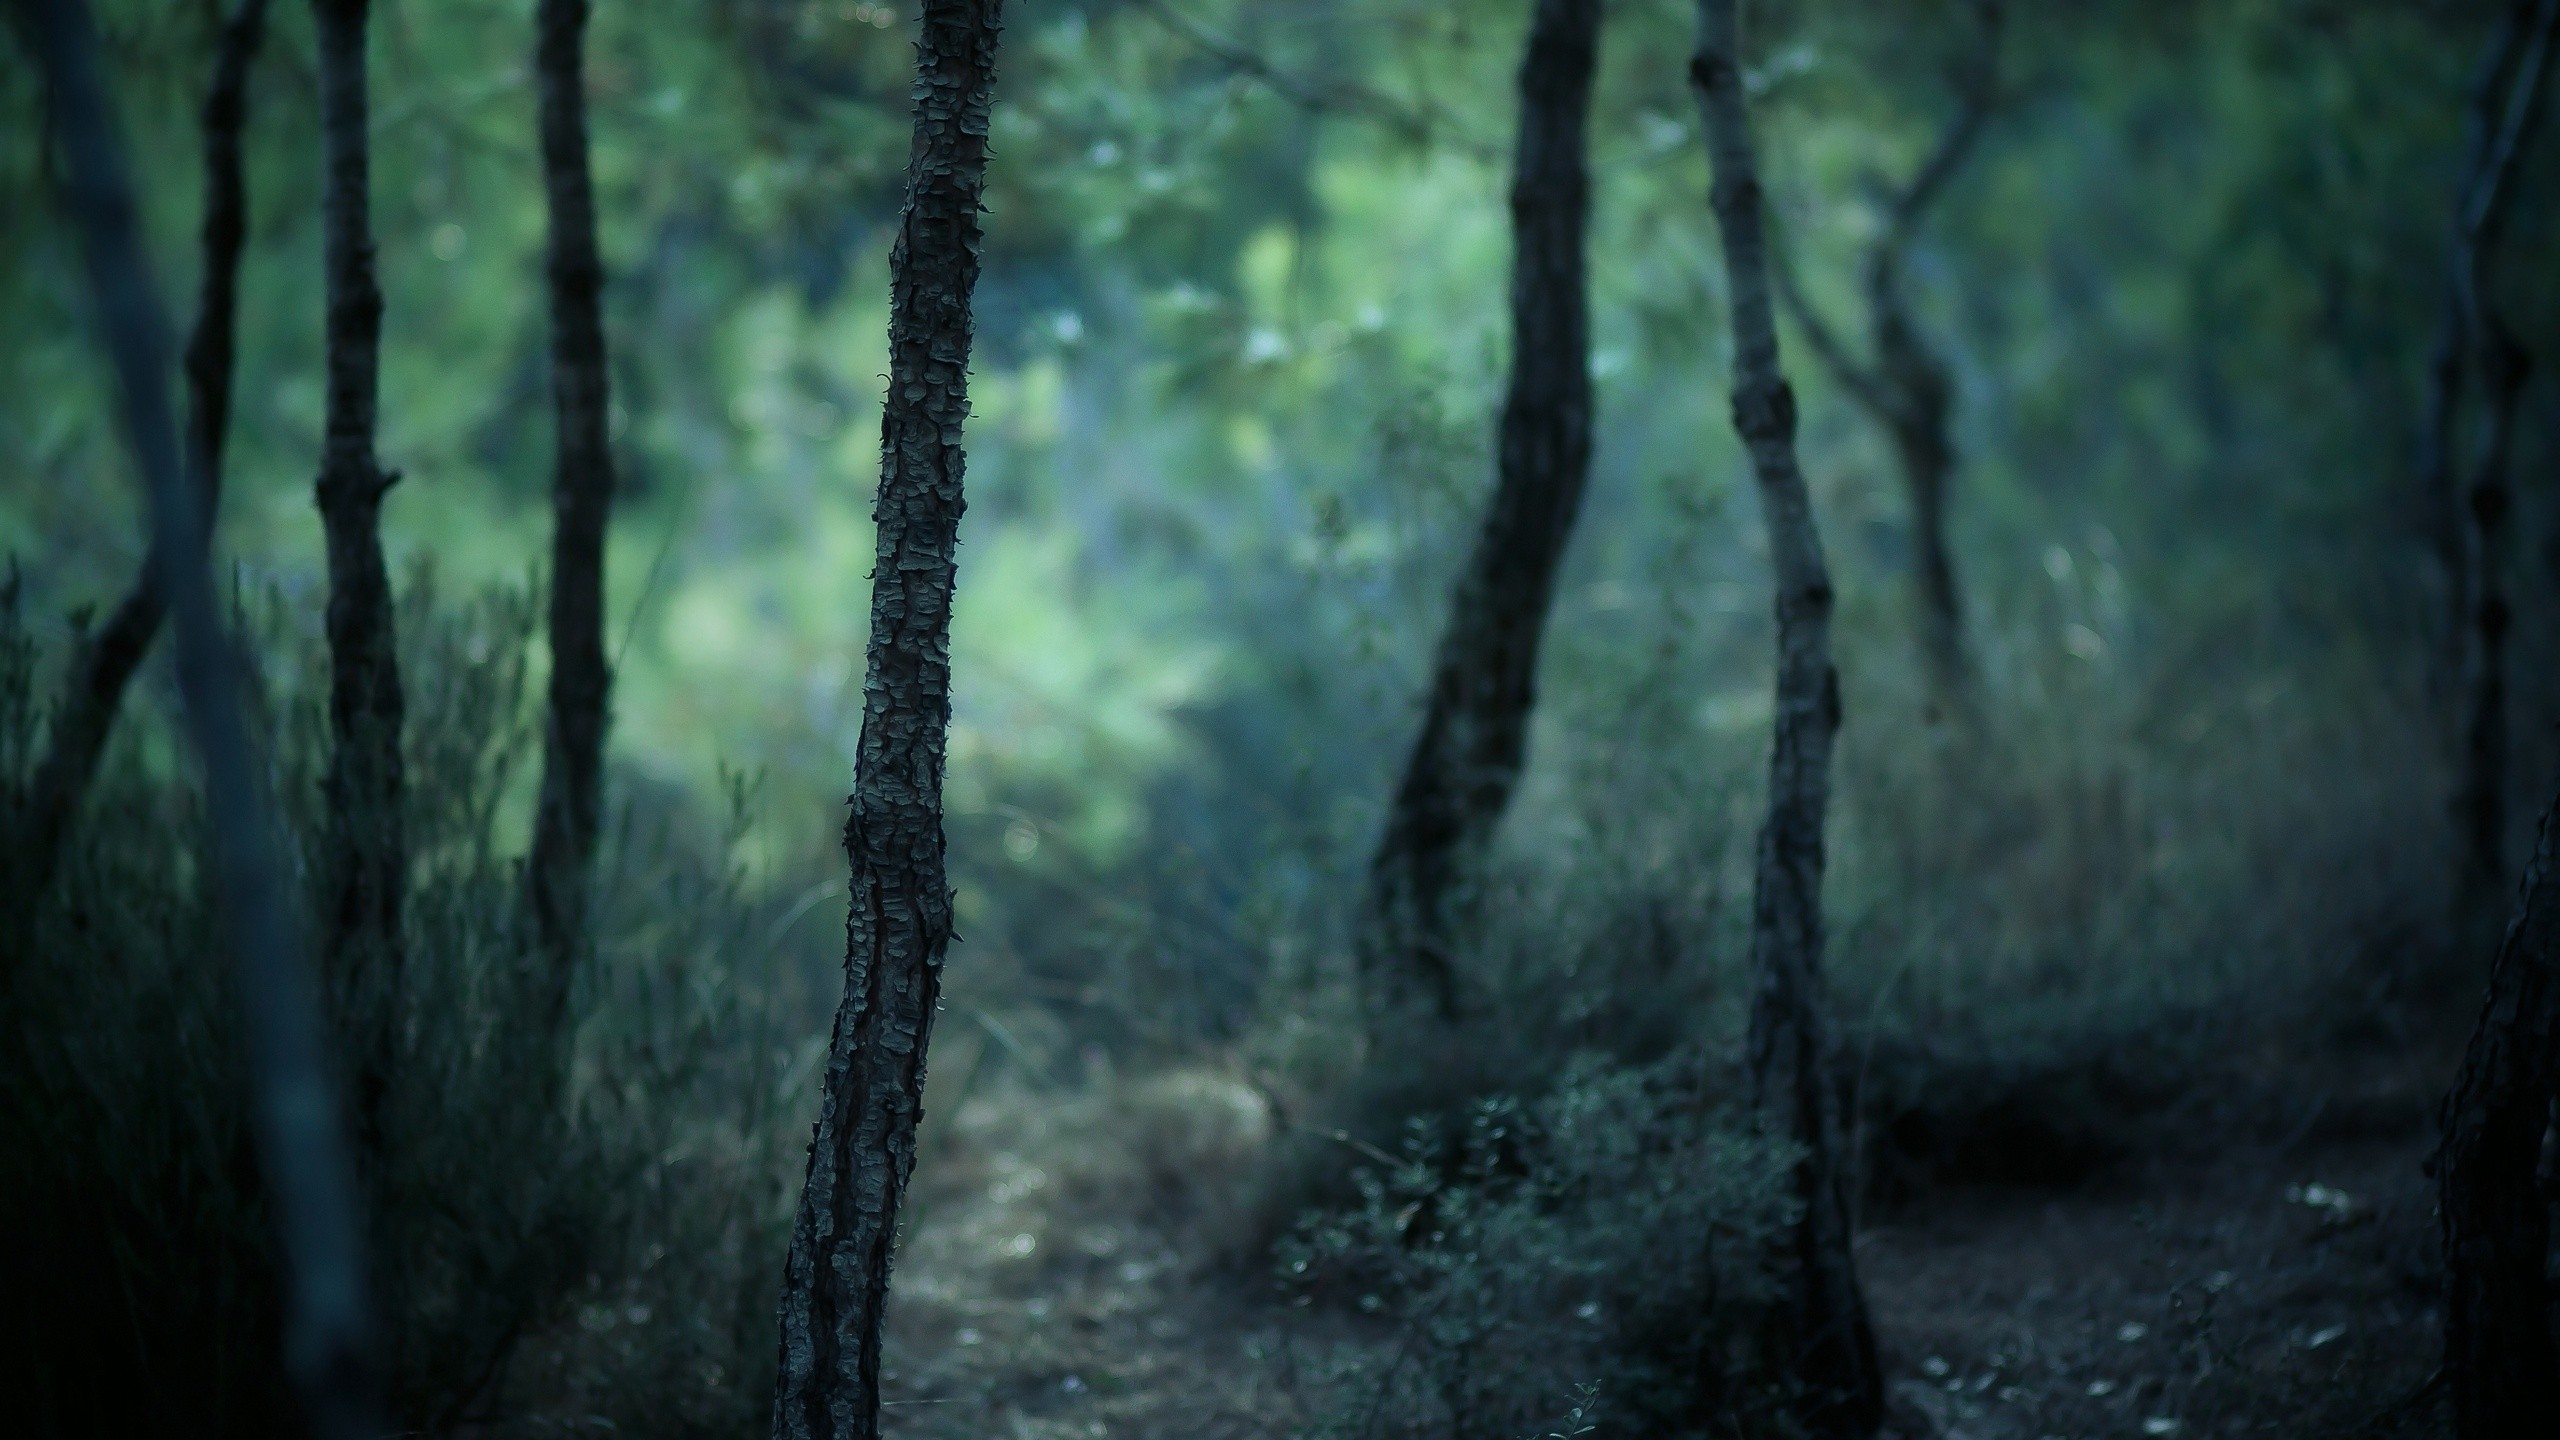 General 2560x1440 forest trees outdoors plants nature